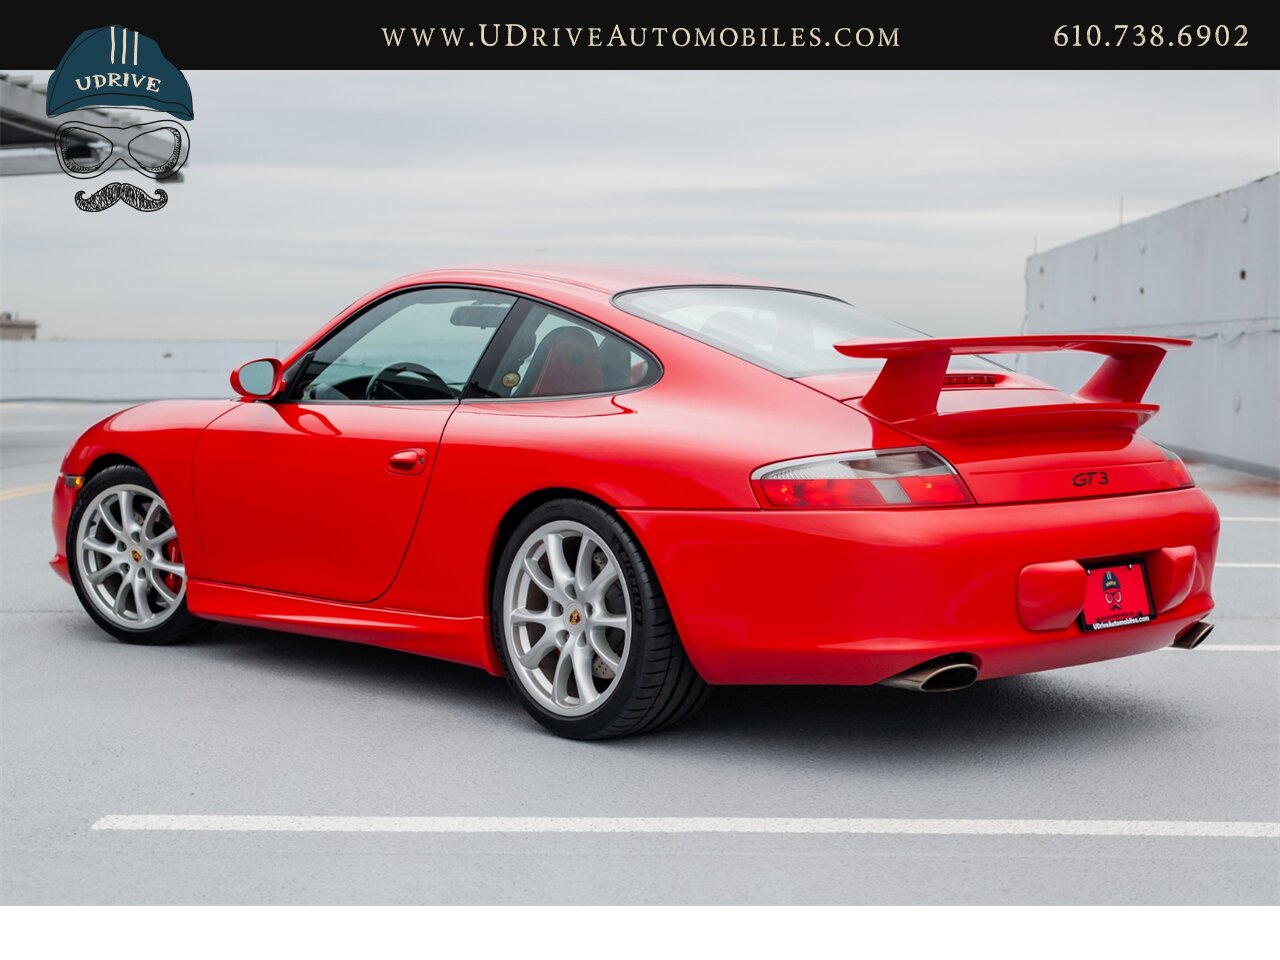 2004 Porsche 911 996 GT3 Guards Red Sport Seats Painted Hardbacks  Painted Center Console 18k Miles - Photo 6 - West Chester, PA 19382